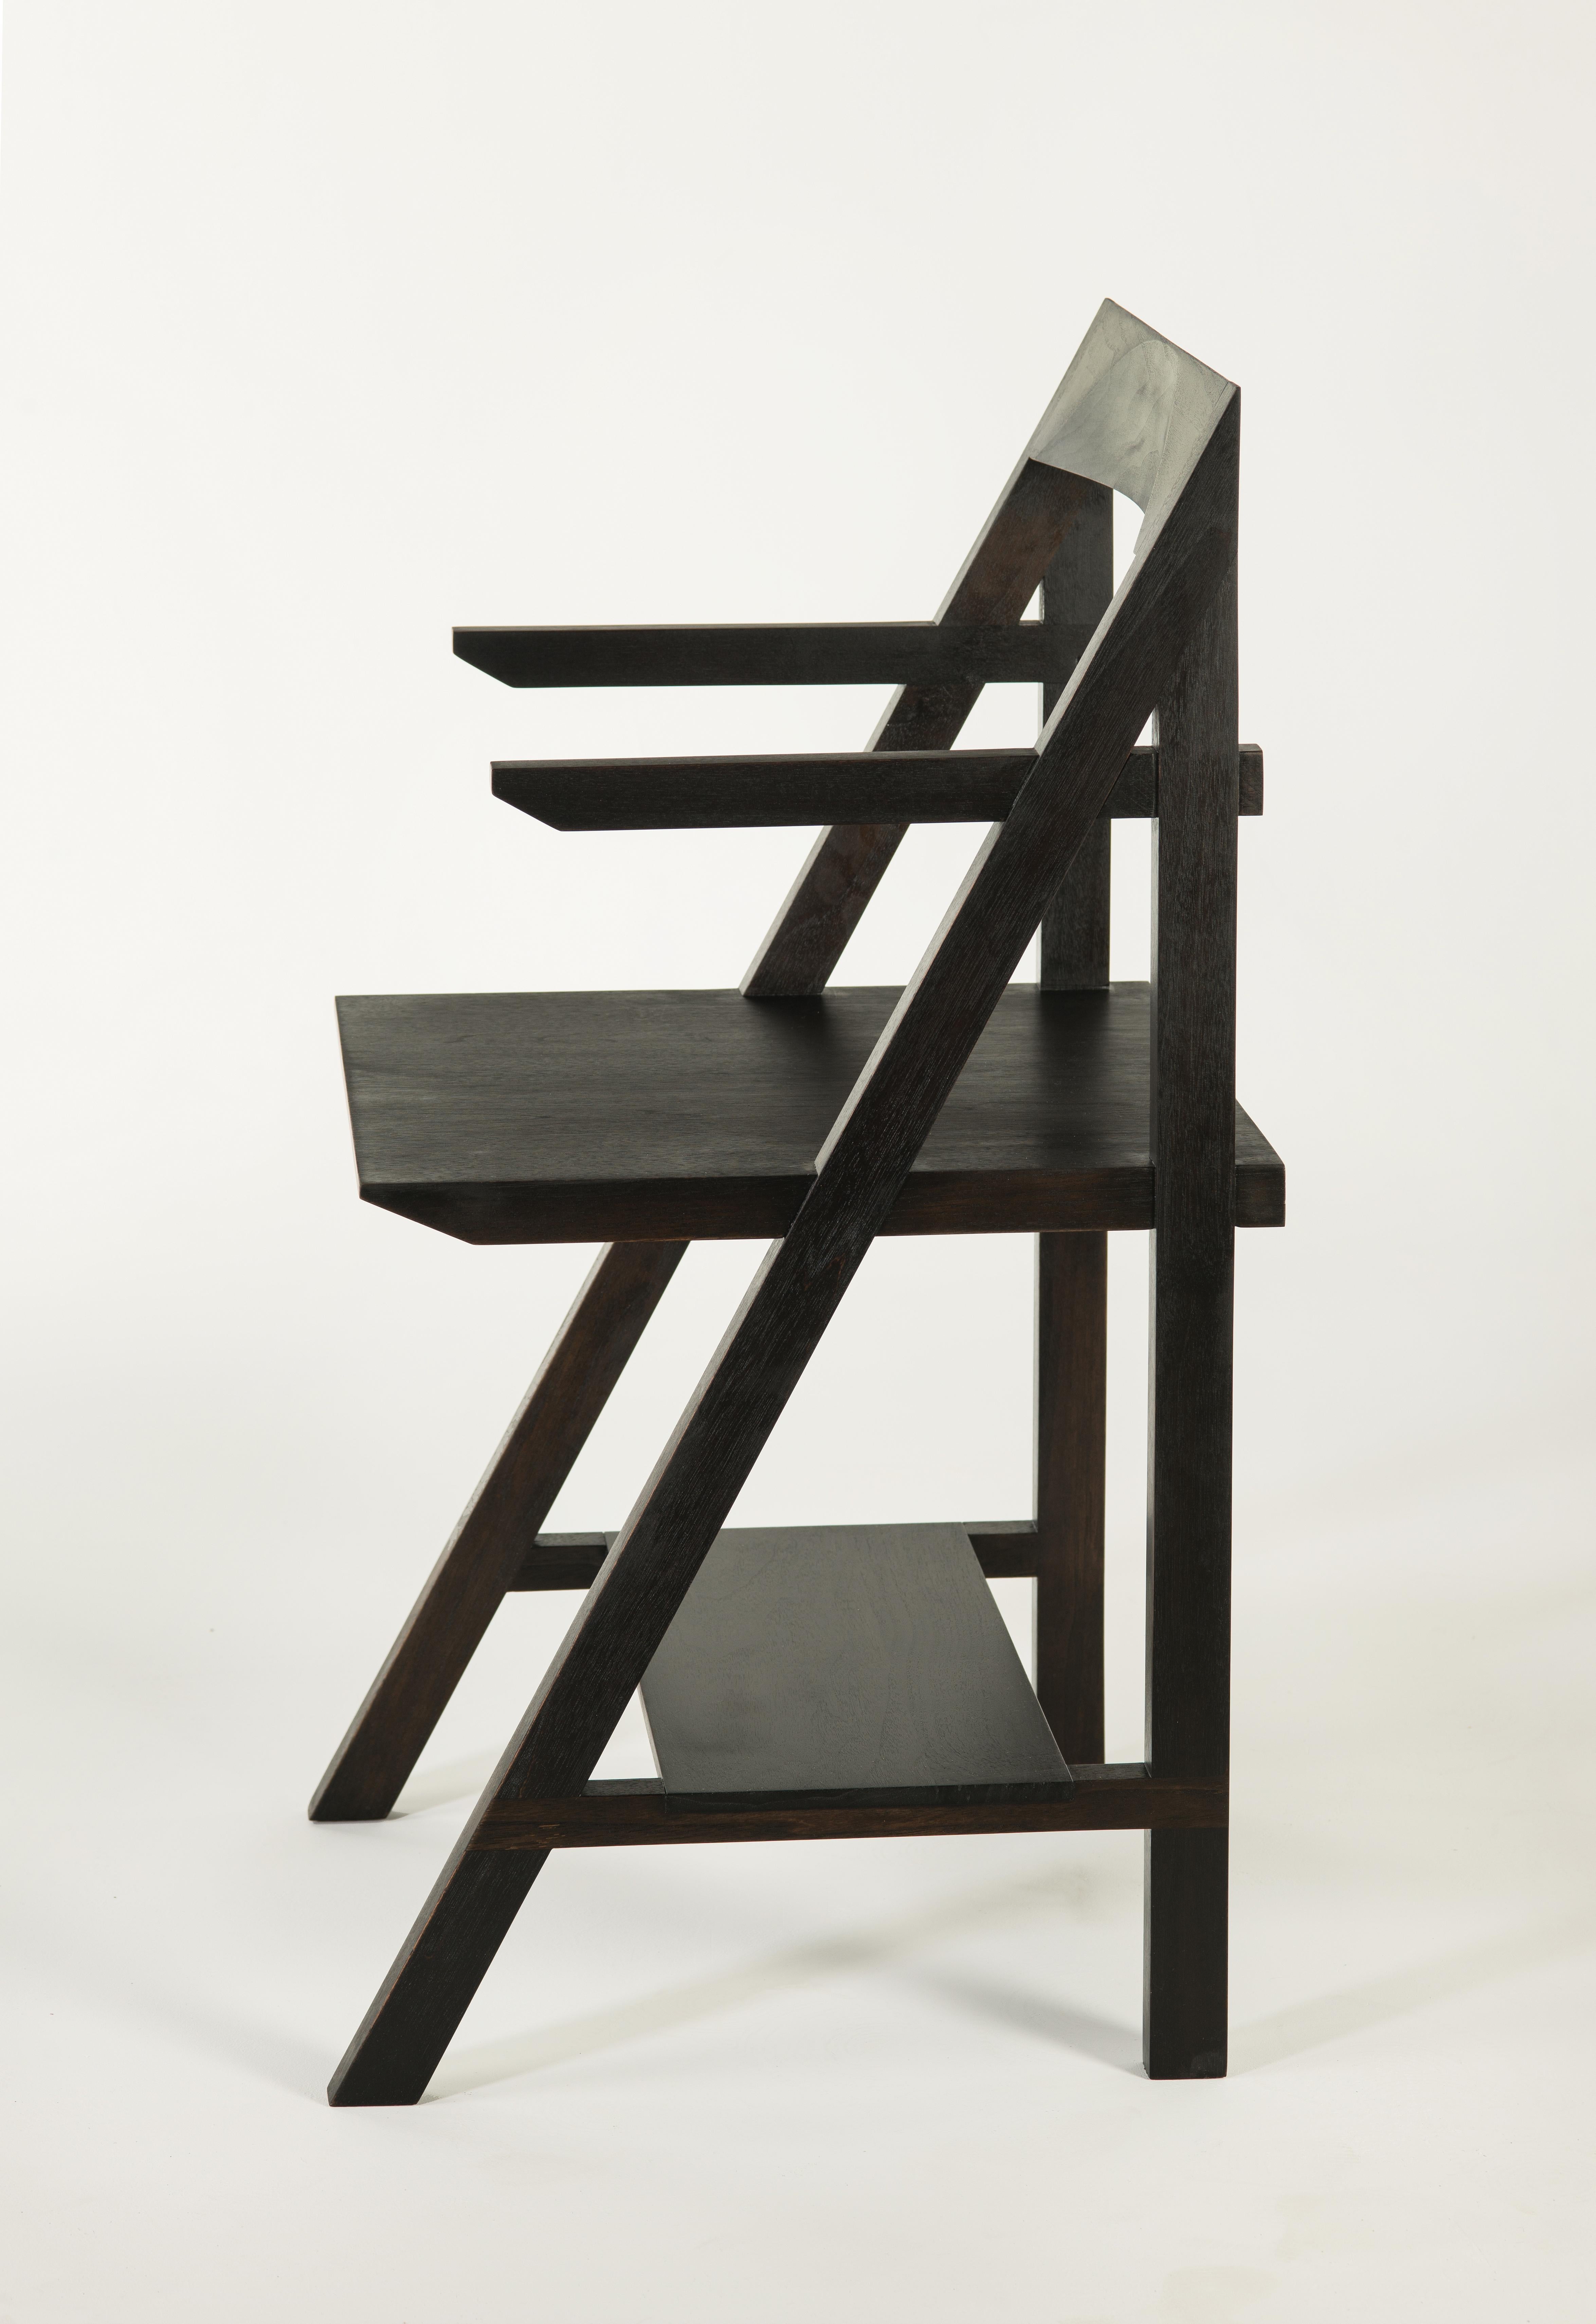 Walnut cantilever armchair by Phaedo.
Dimensions: H 35” x D 18-1/2” x W 20-3/4” inches.
Materials: oxidized black walnut. 

The Cantilever chair is a true blend of form and function, the shelf below provides a practical means of storage without